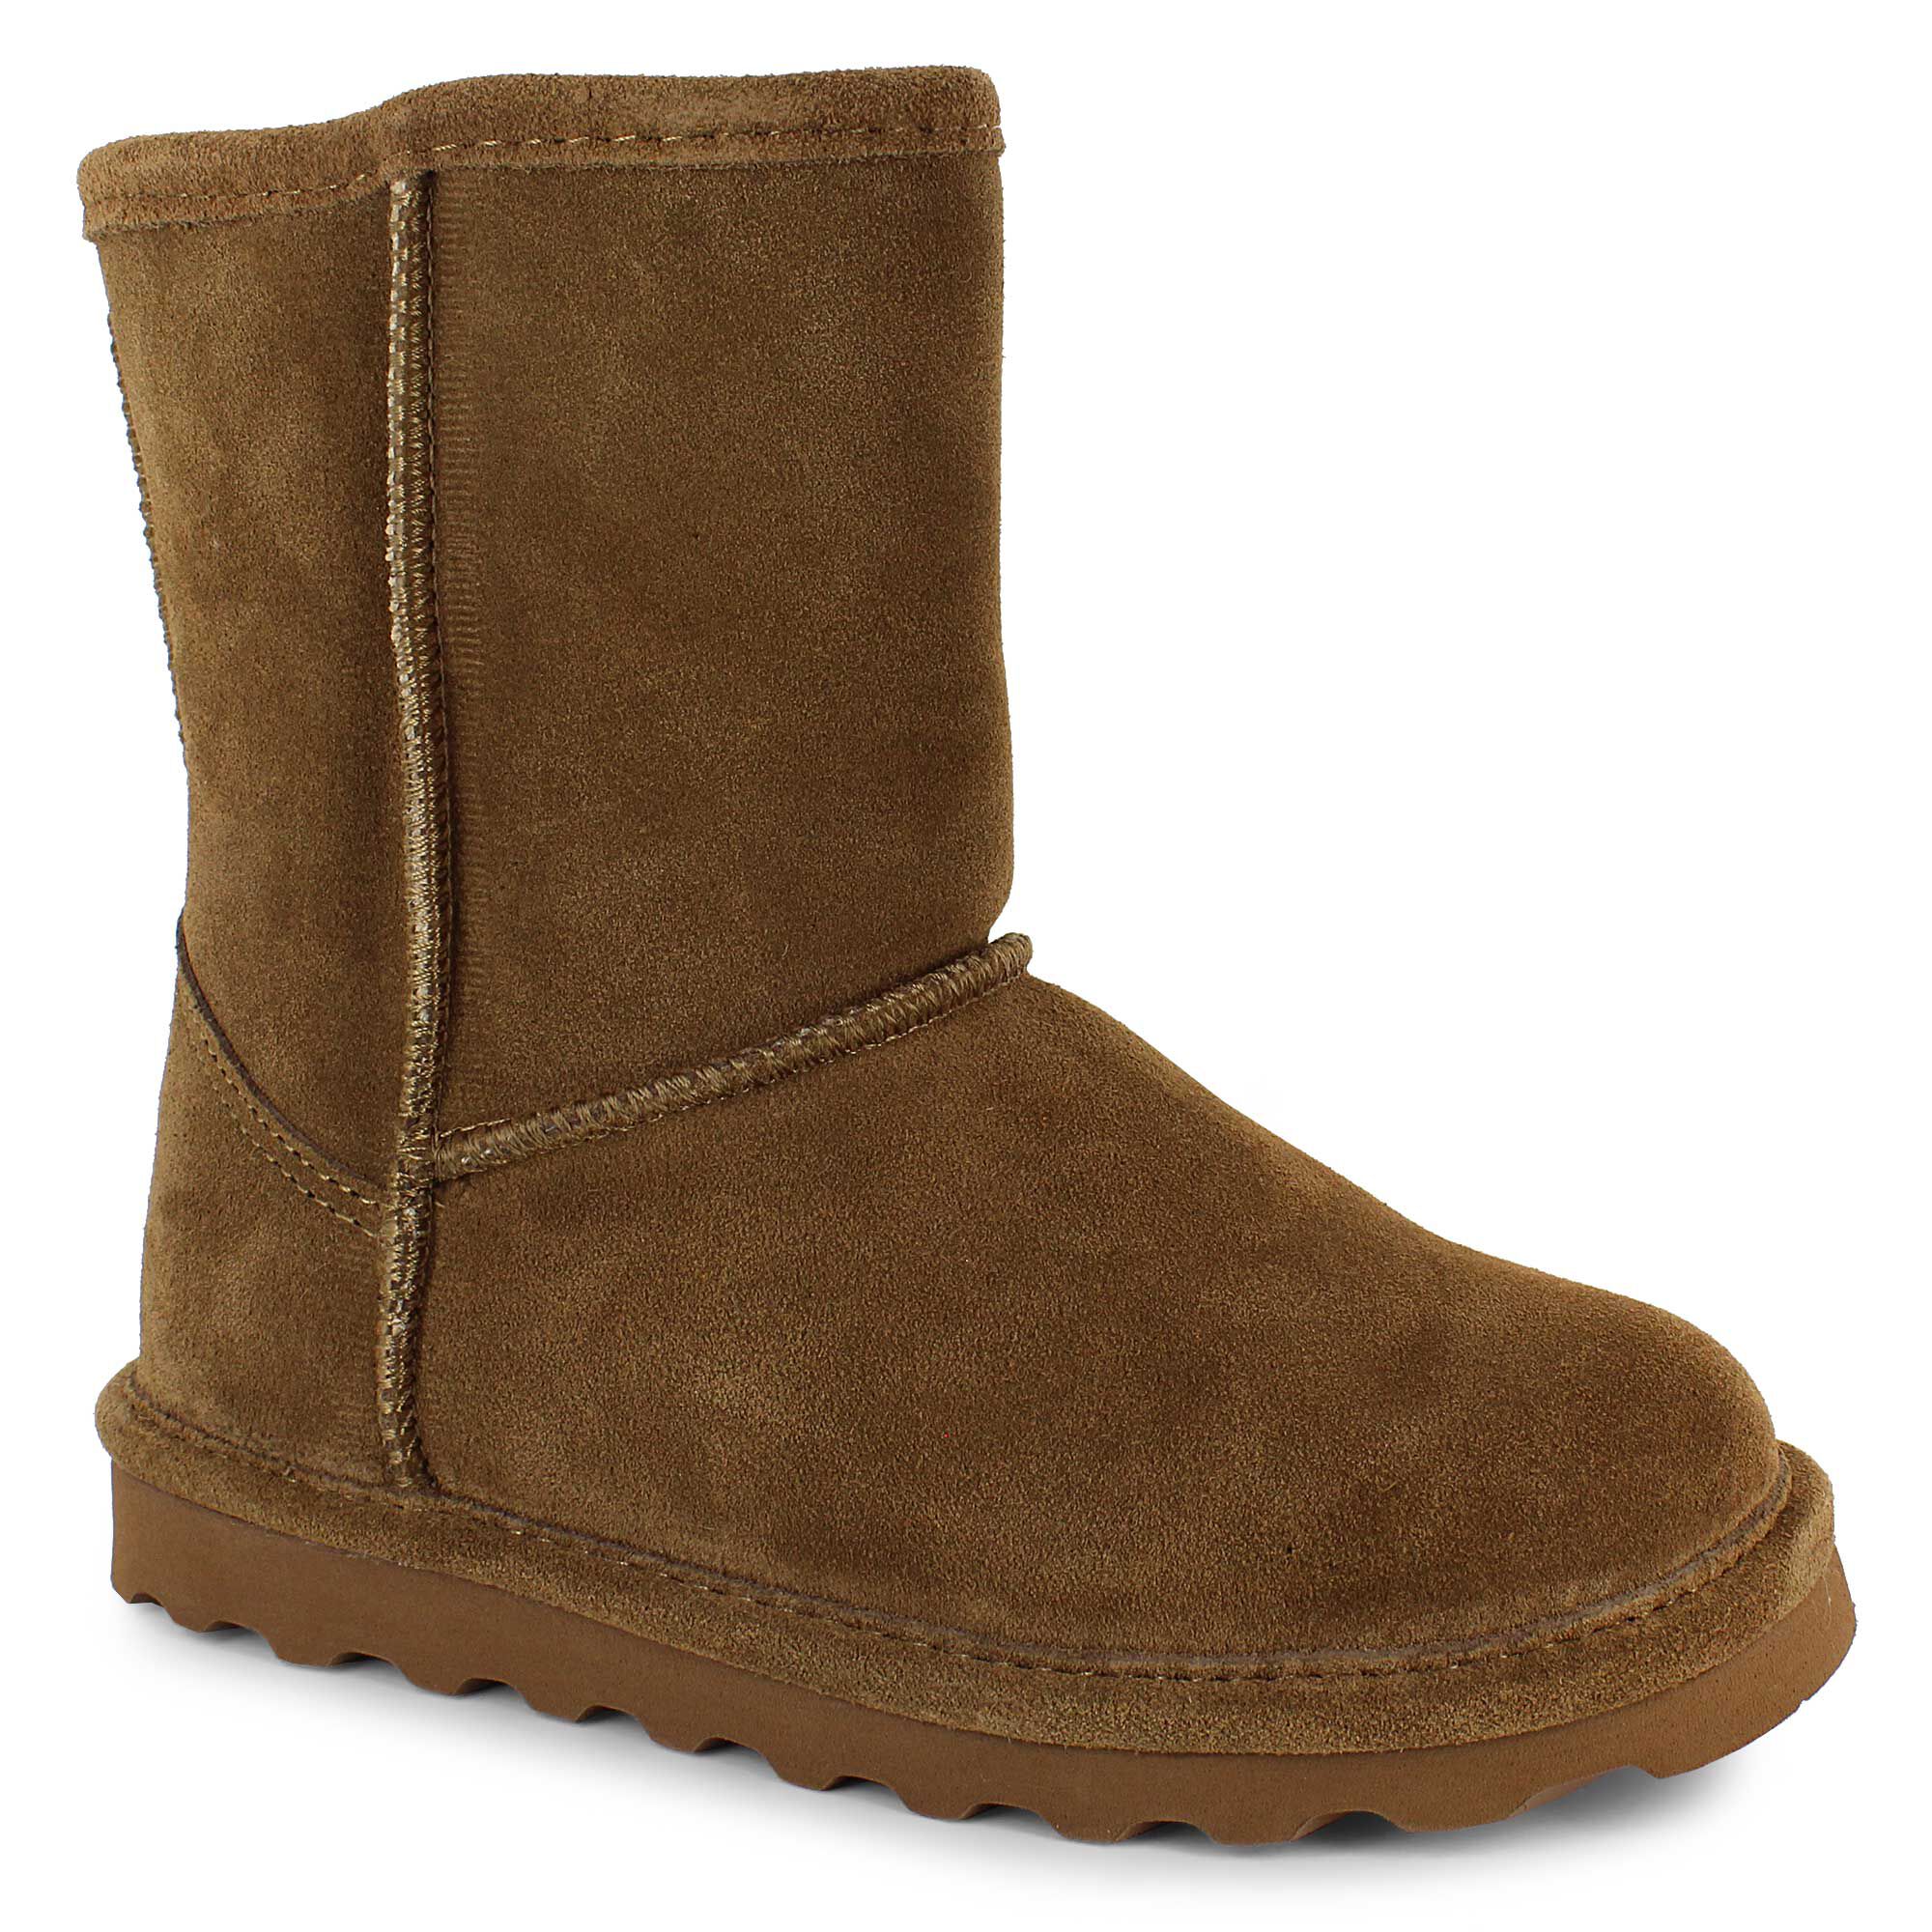 Girls' Boots | Shop Now at SHOE DEPT 